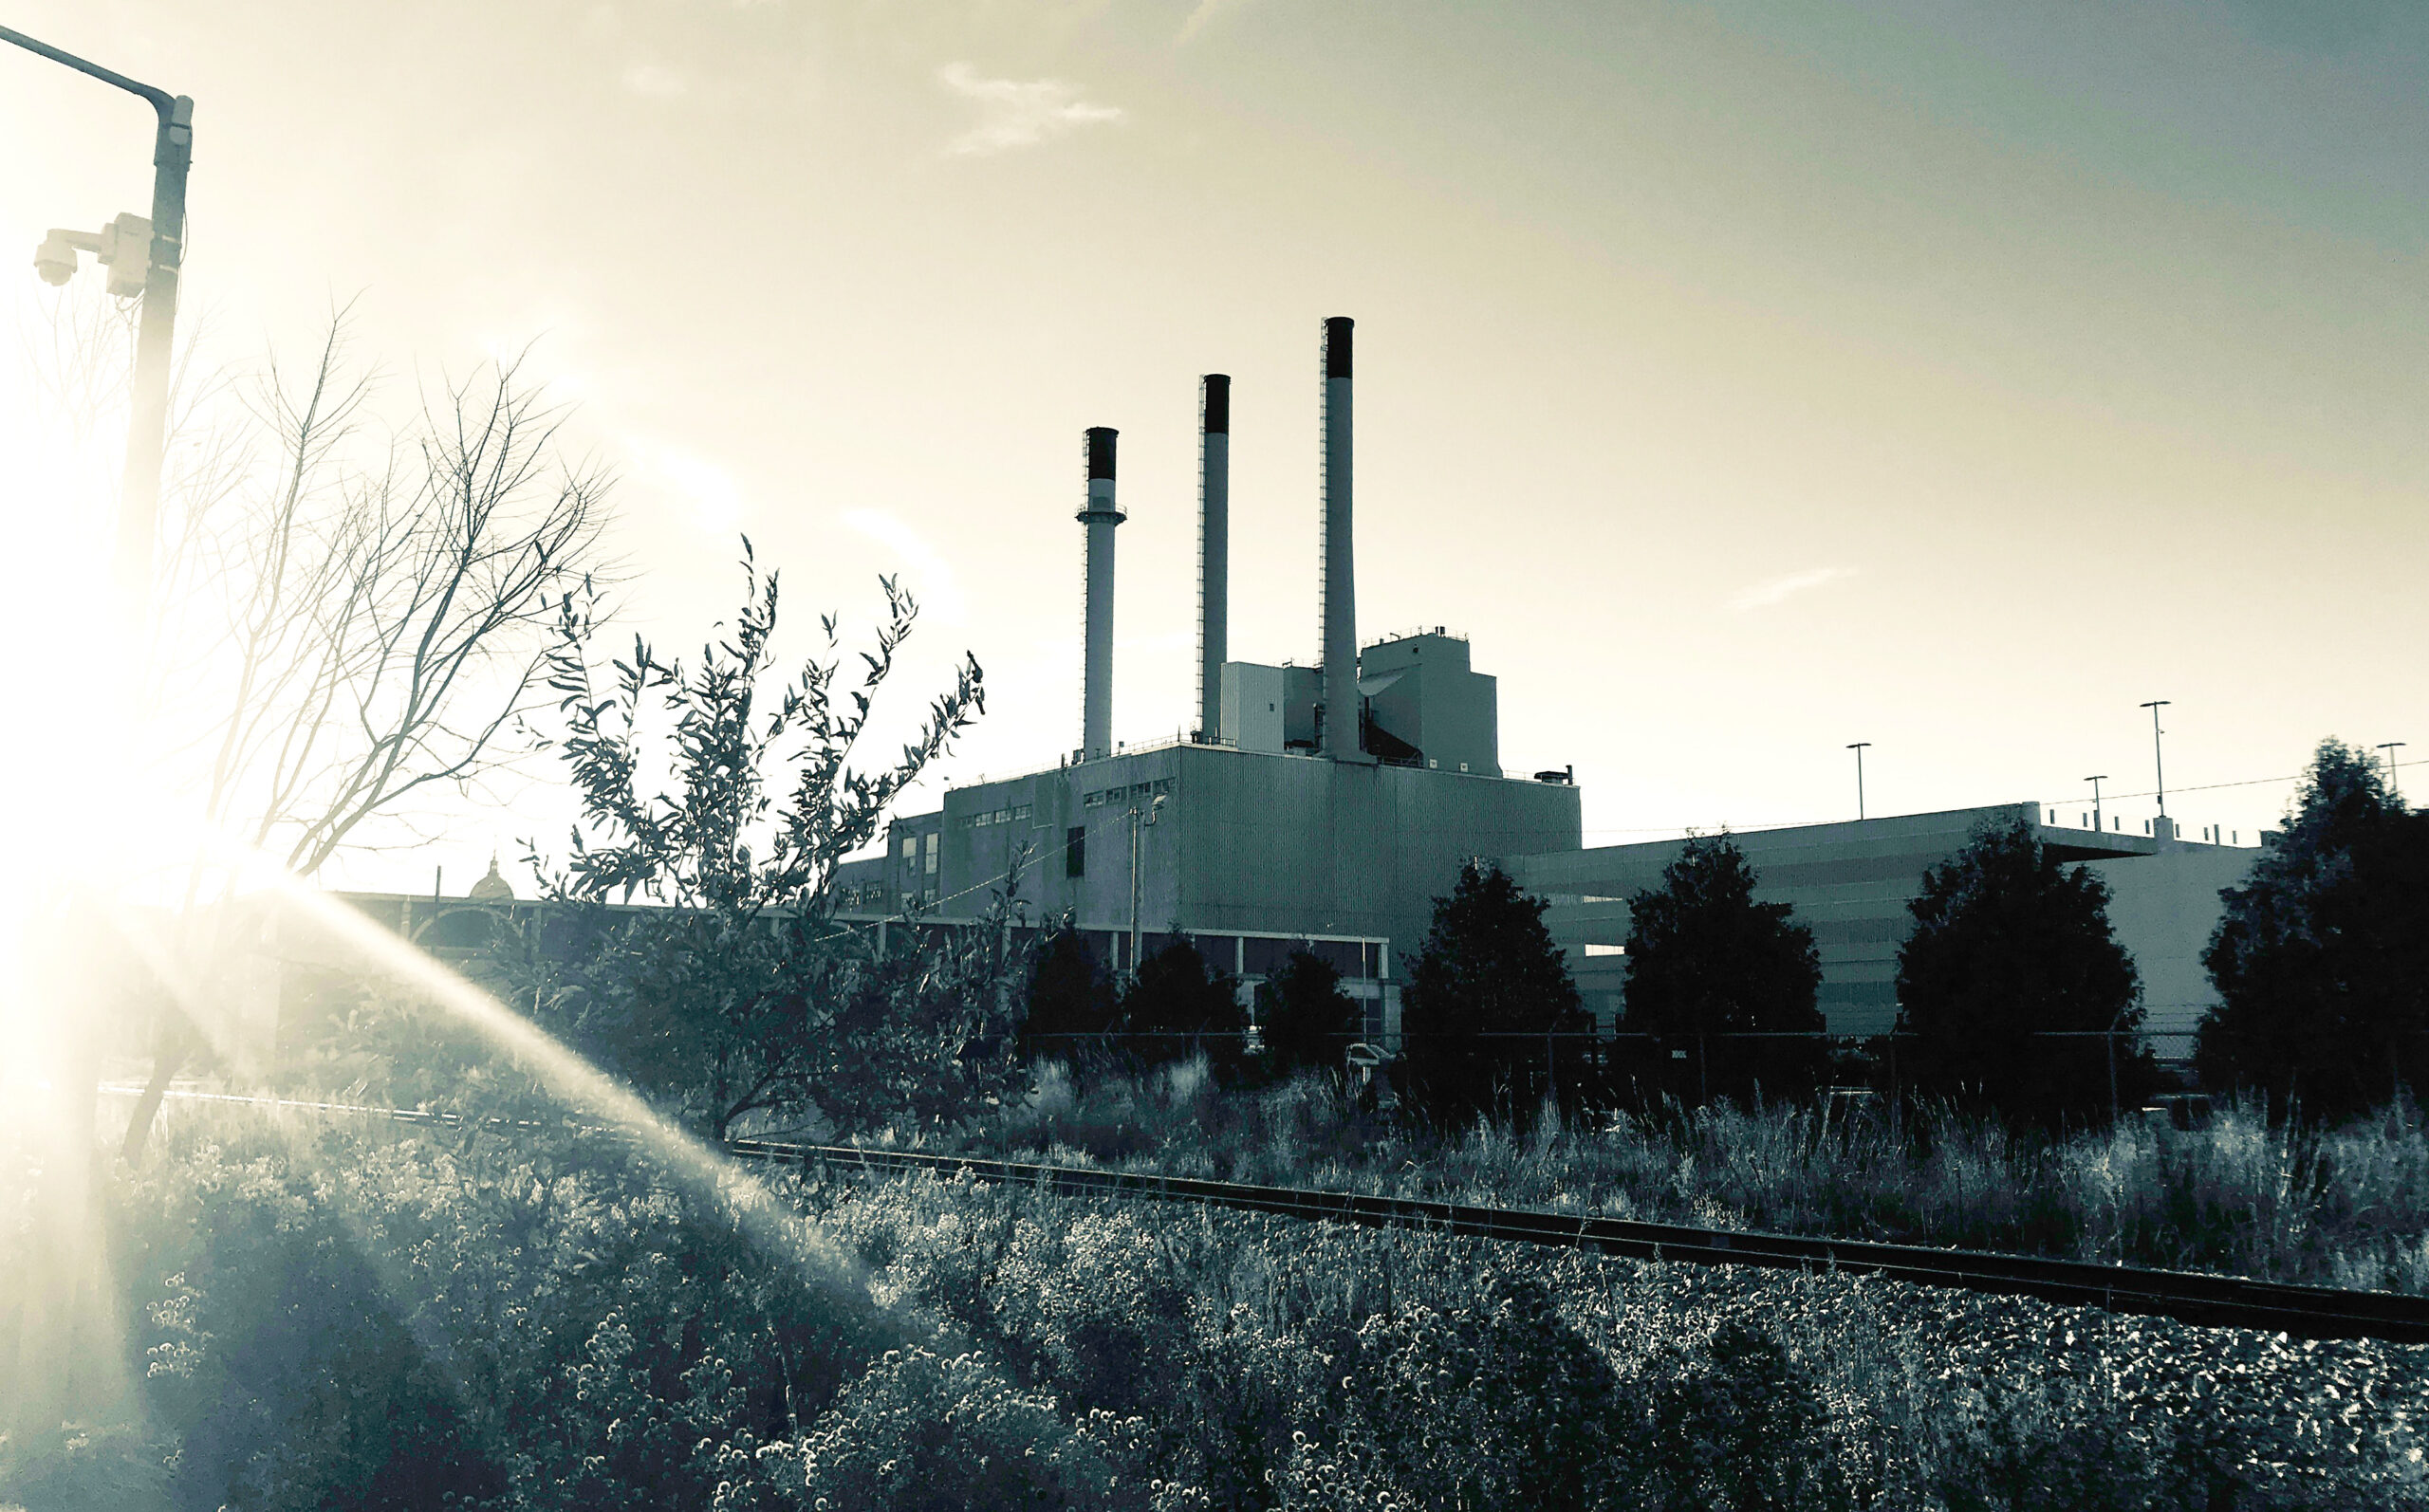 A gas-powered electric generating station with three chimneys